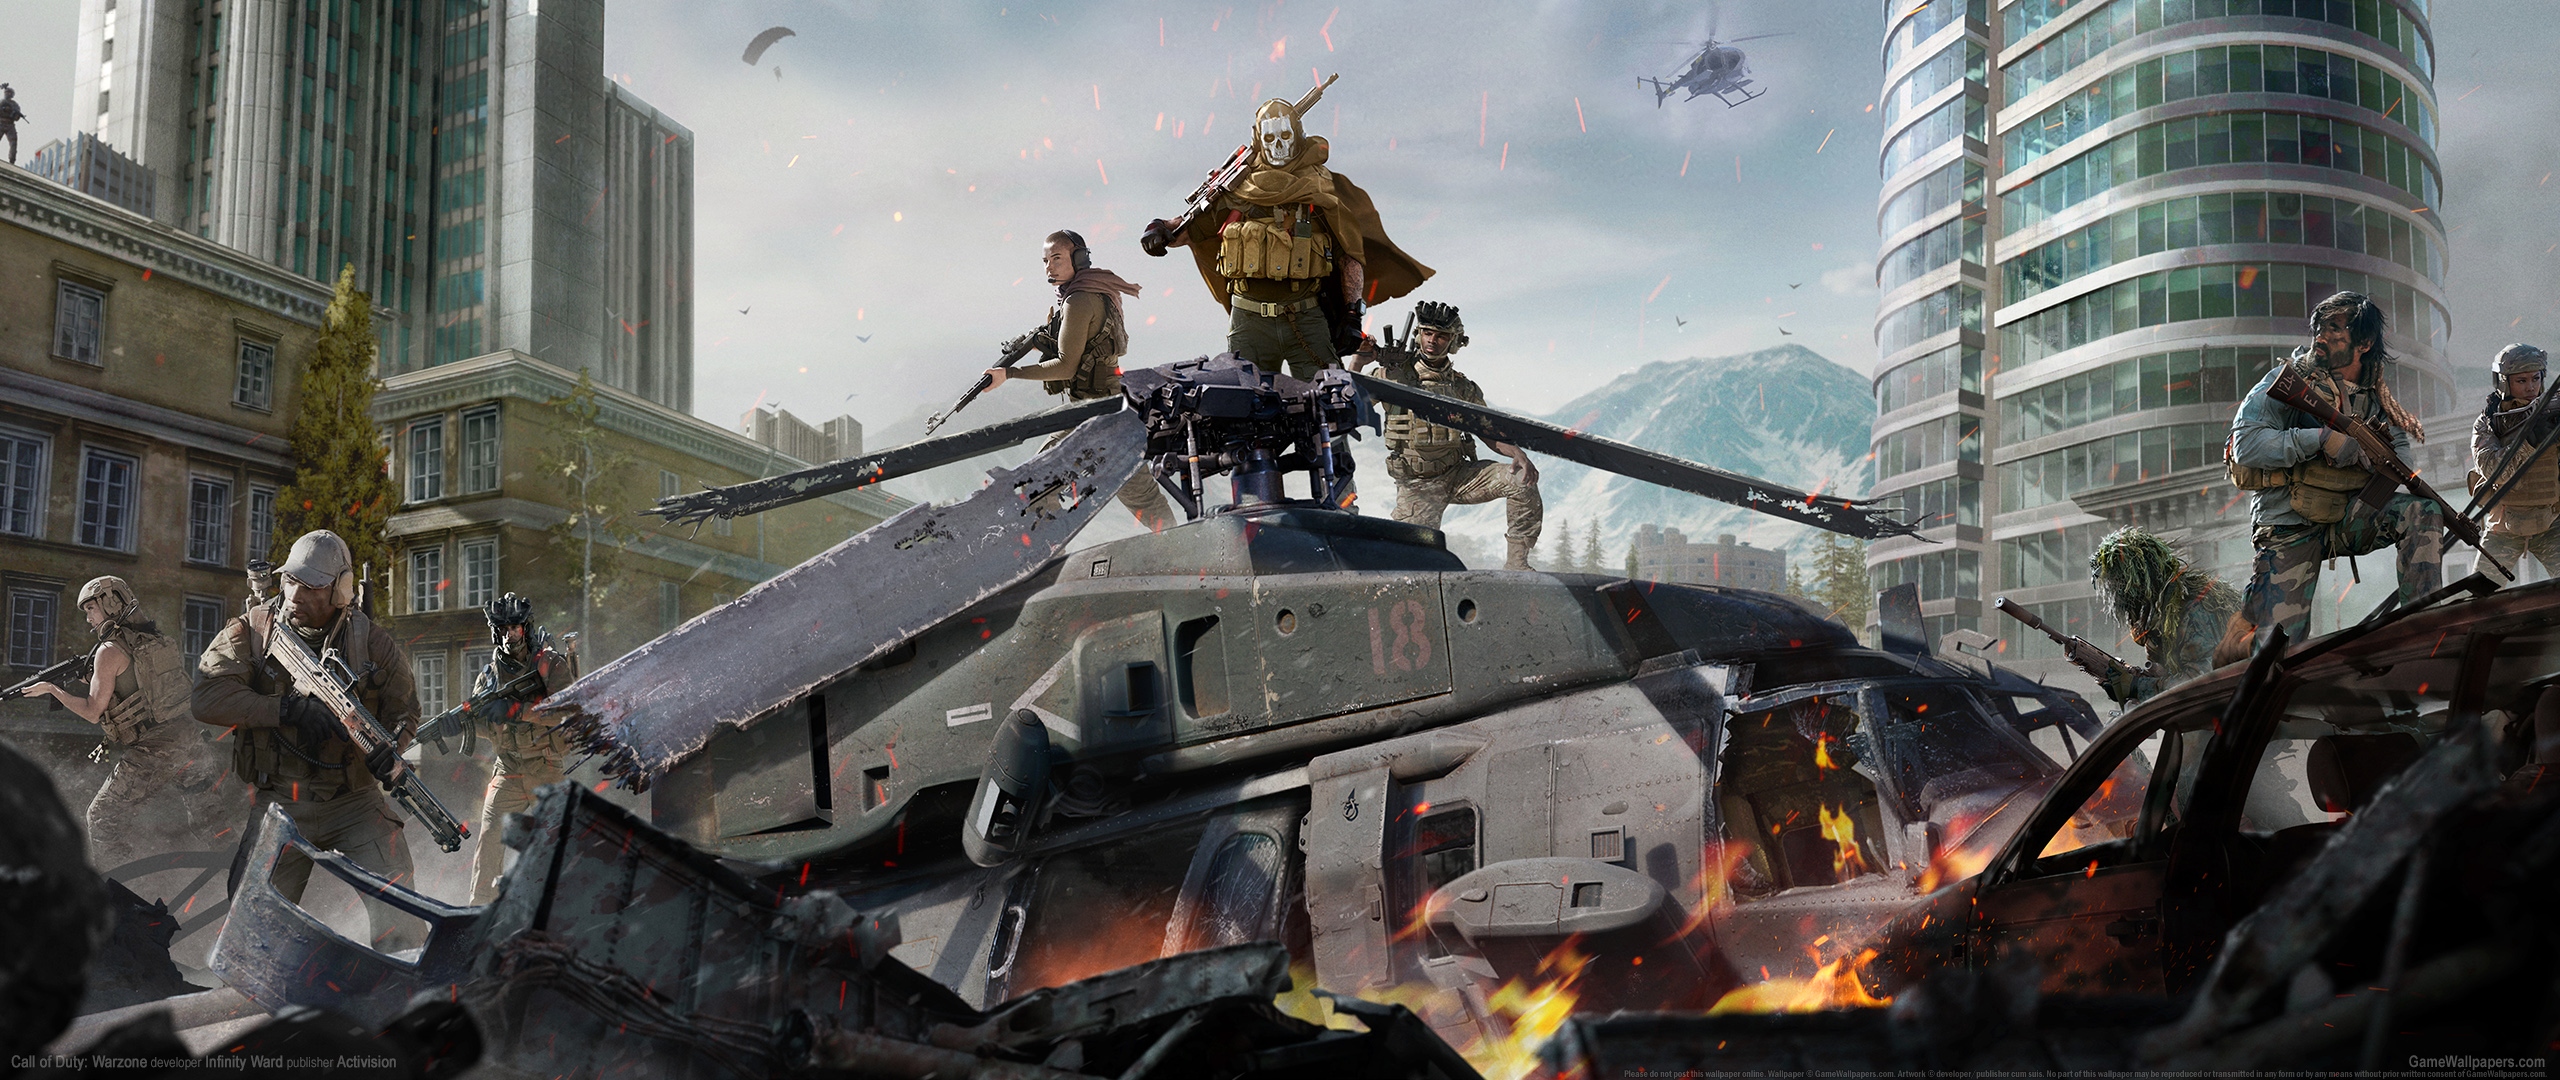 Call of Duty: Warzone 2560x1080 wallpaper or background 01